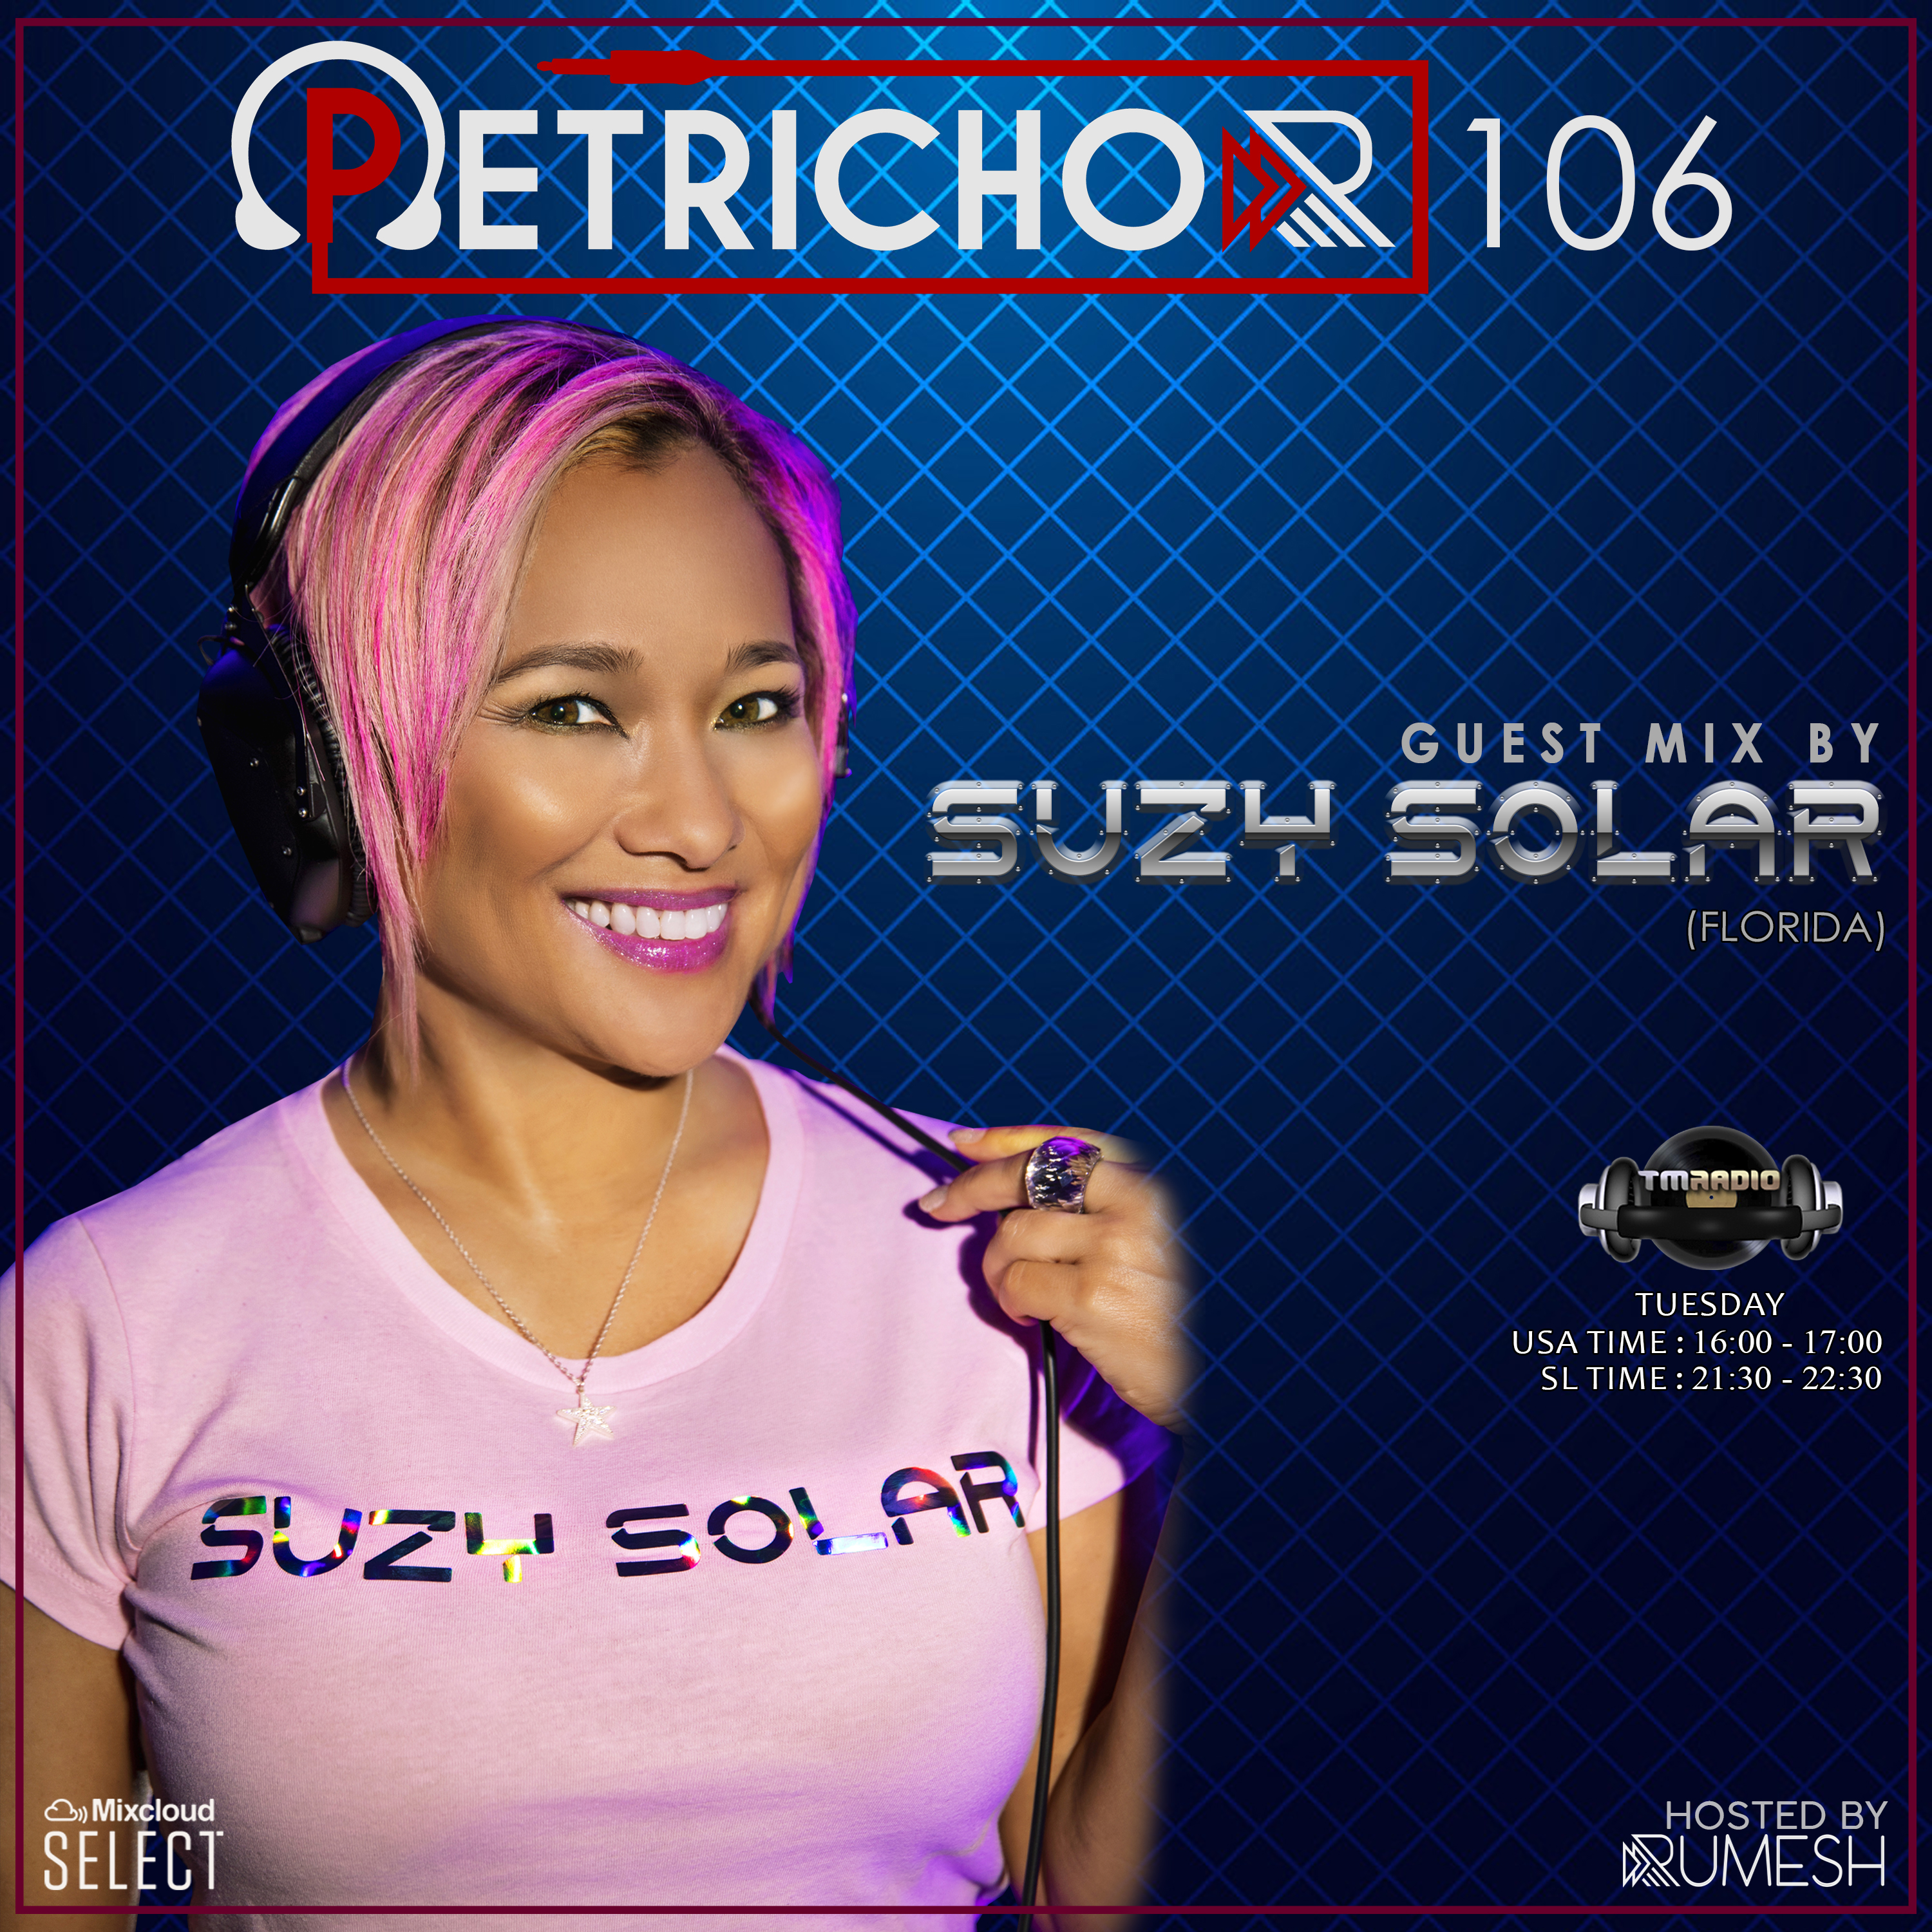 Petrichor :: Petrichor 106 Guest Mix by Suzy Solar -(Florida) (aired on February 8th) banner logo